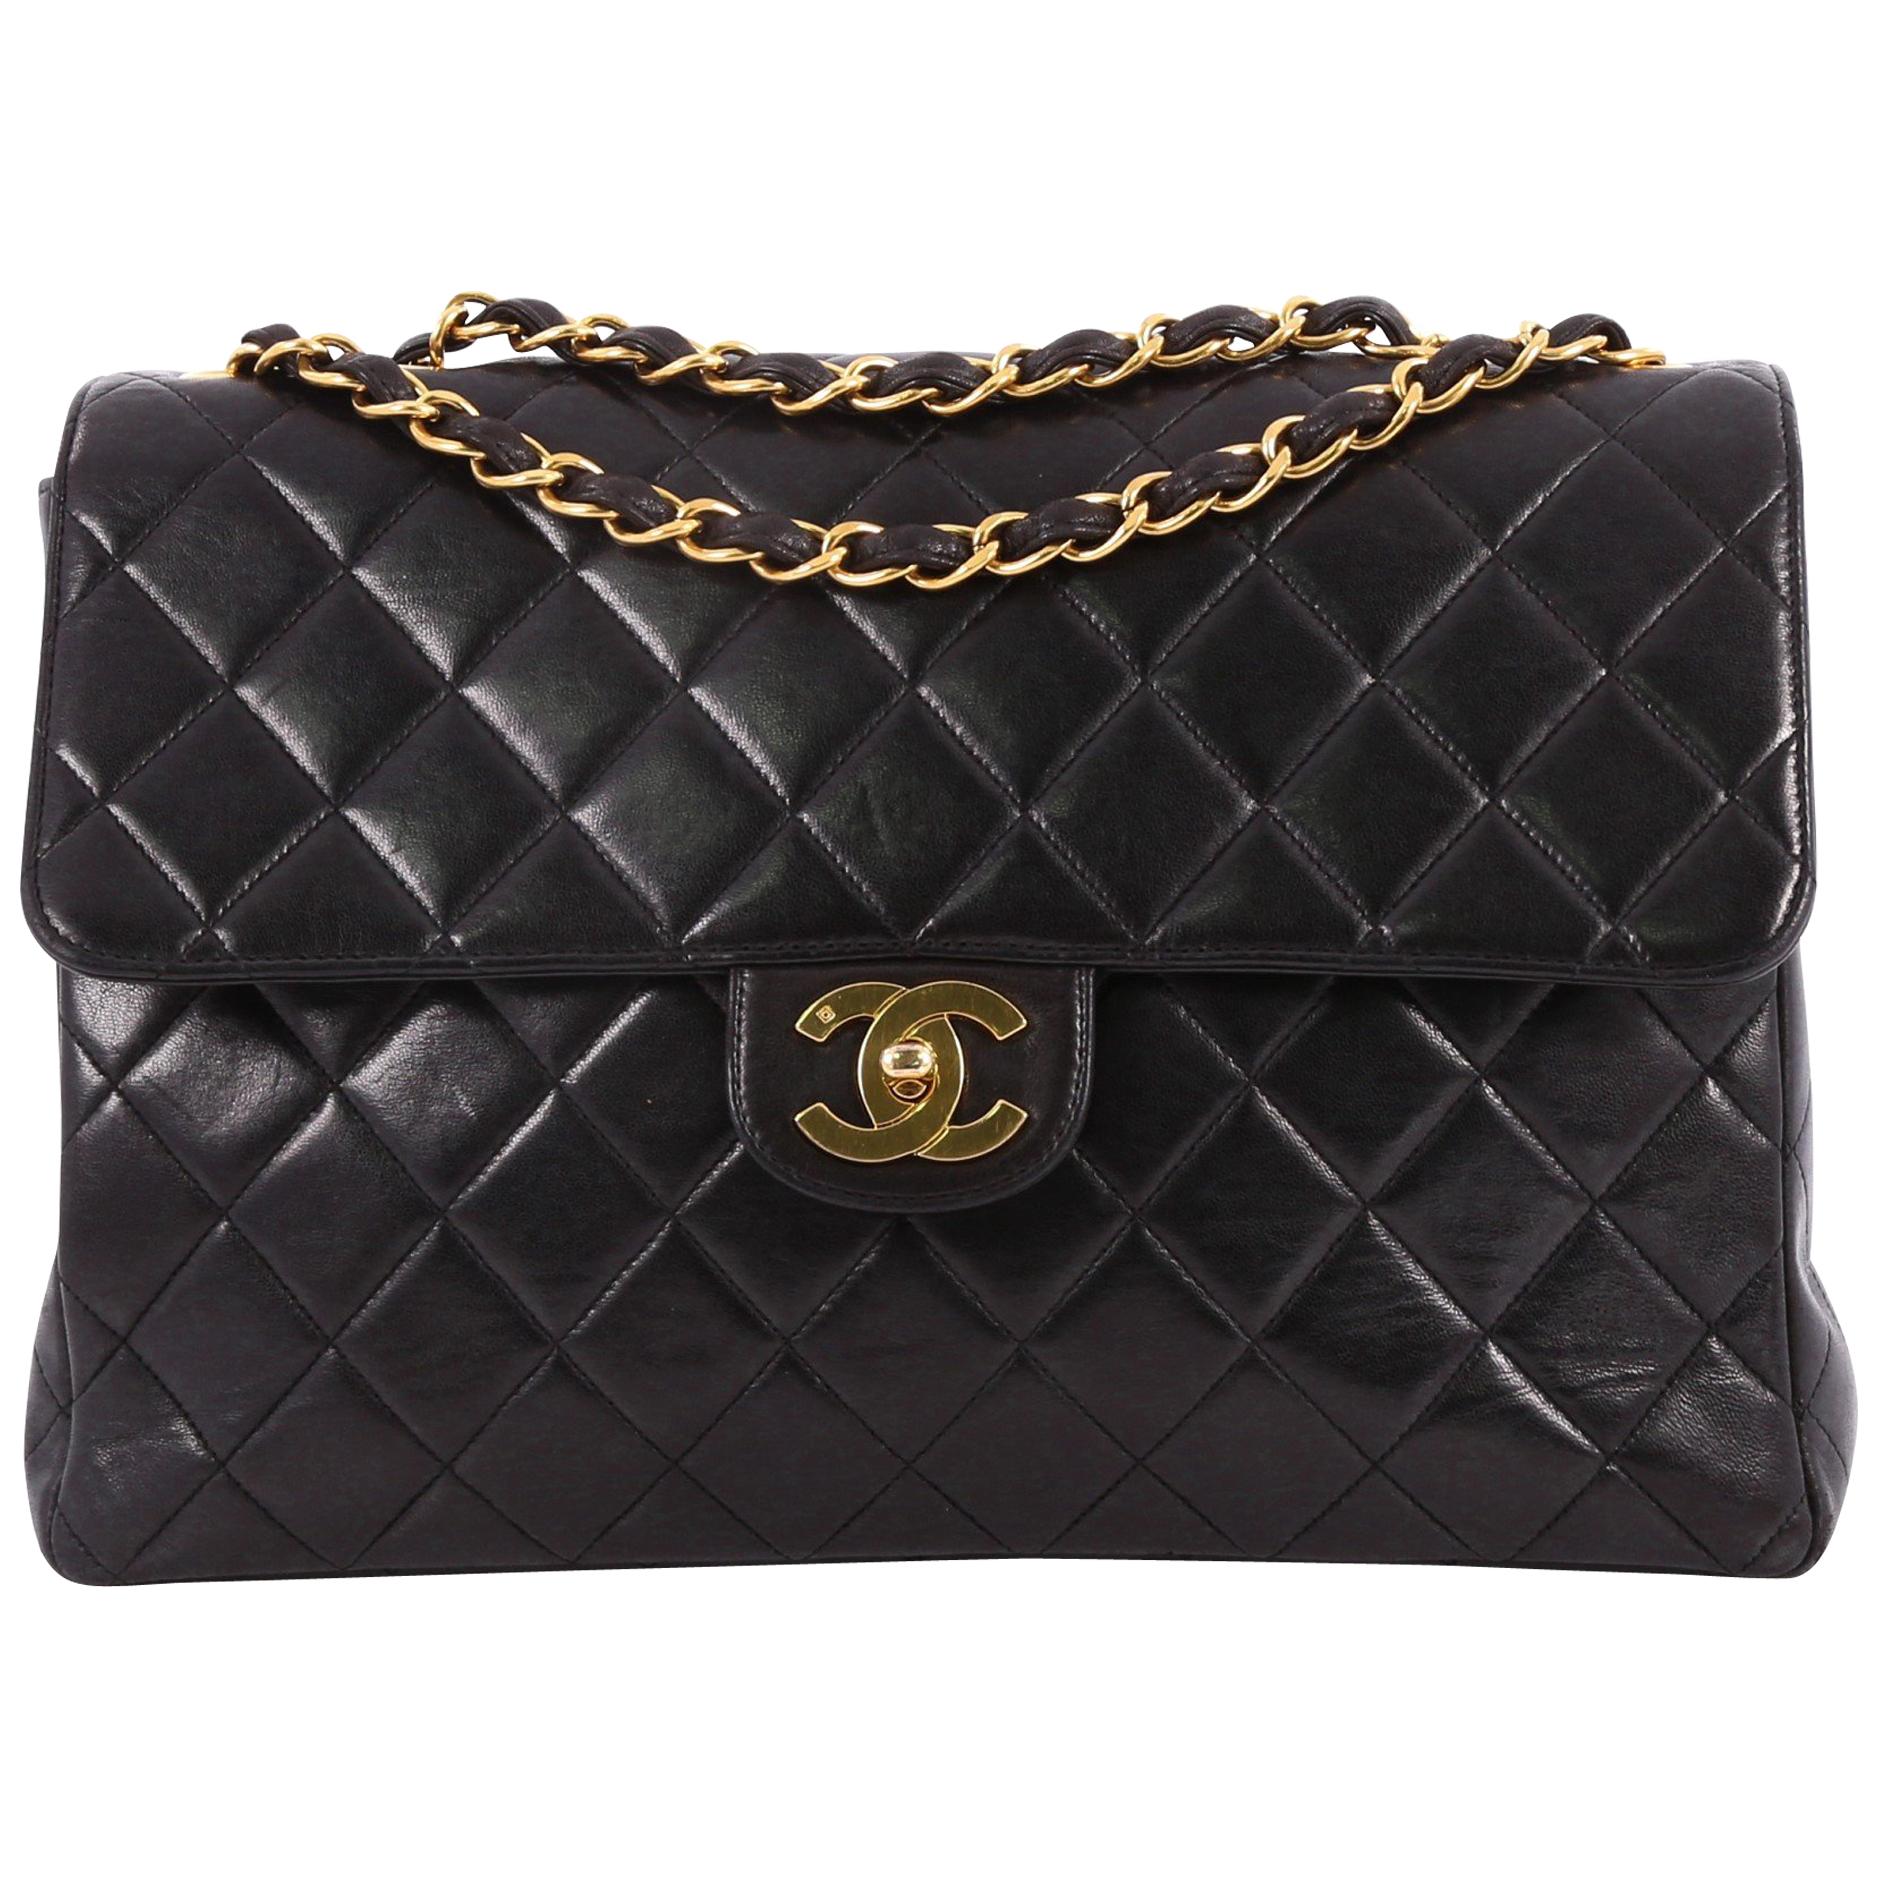 Chanel Vintage Classic Single Flap Bag Quilted Lambskin Jumbo